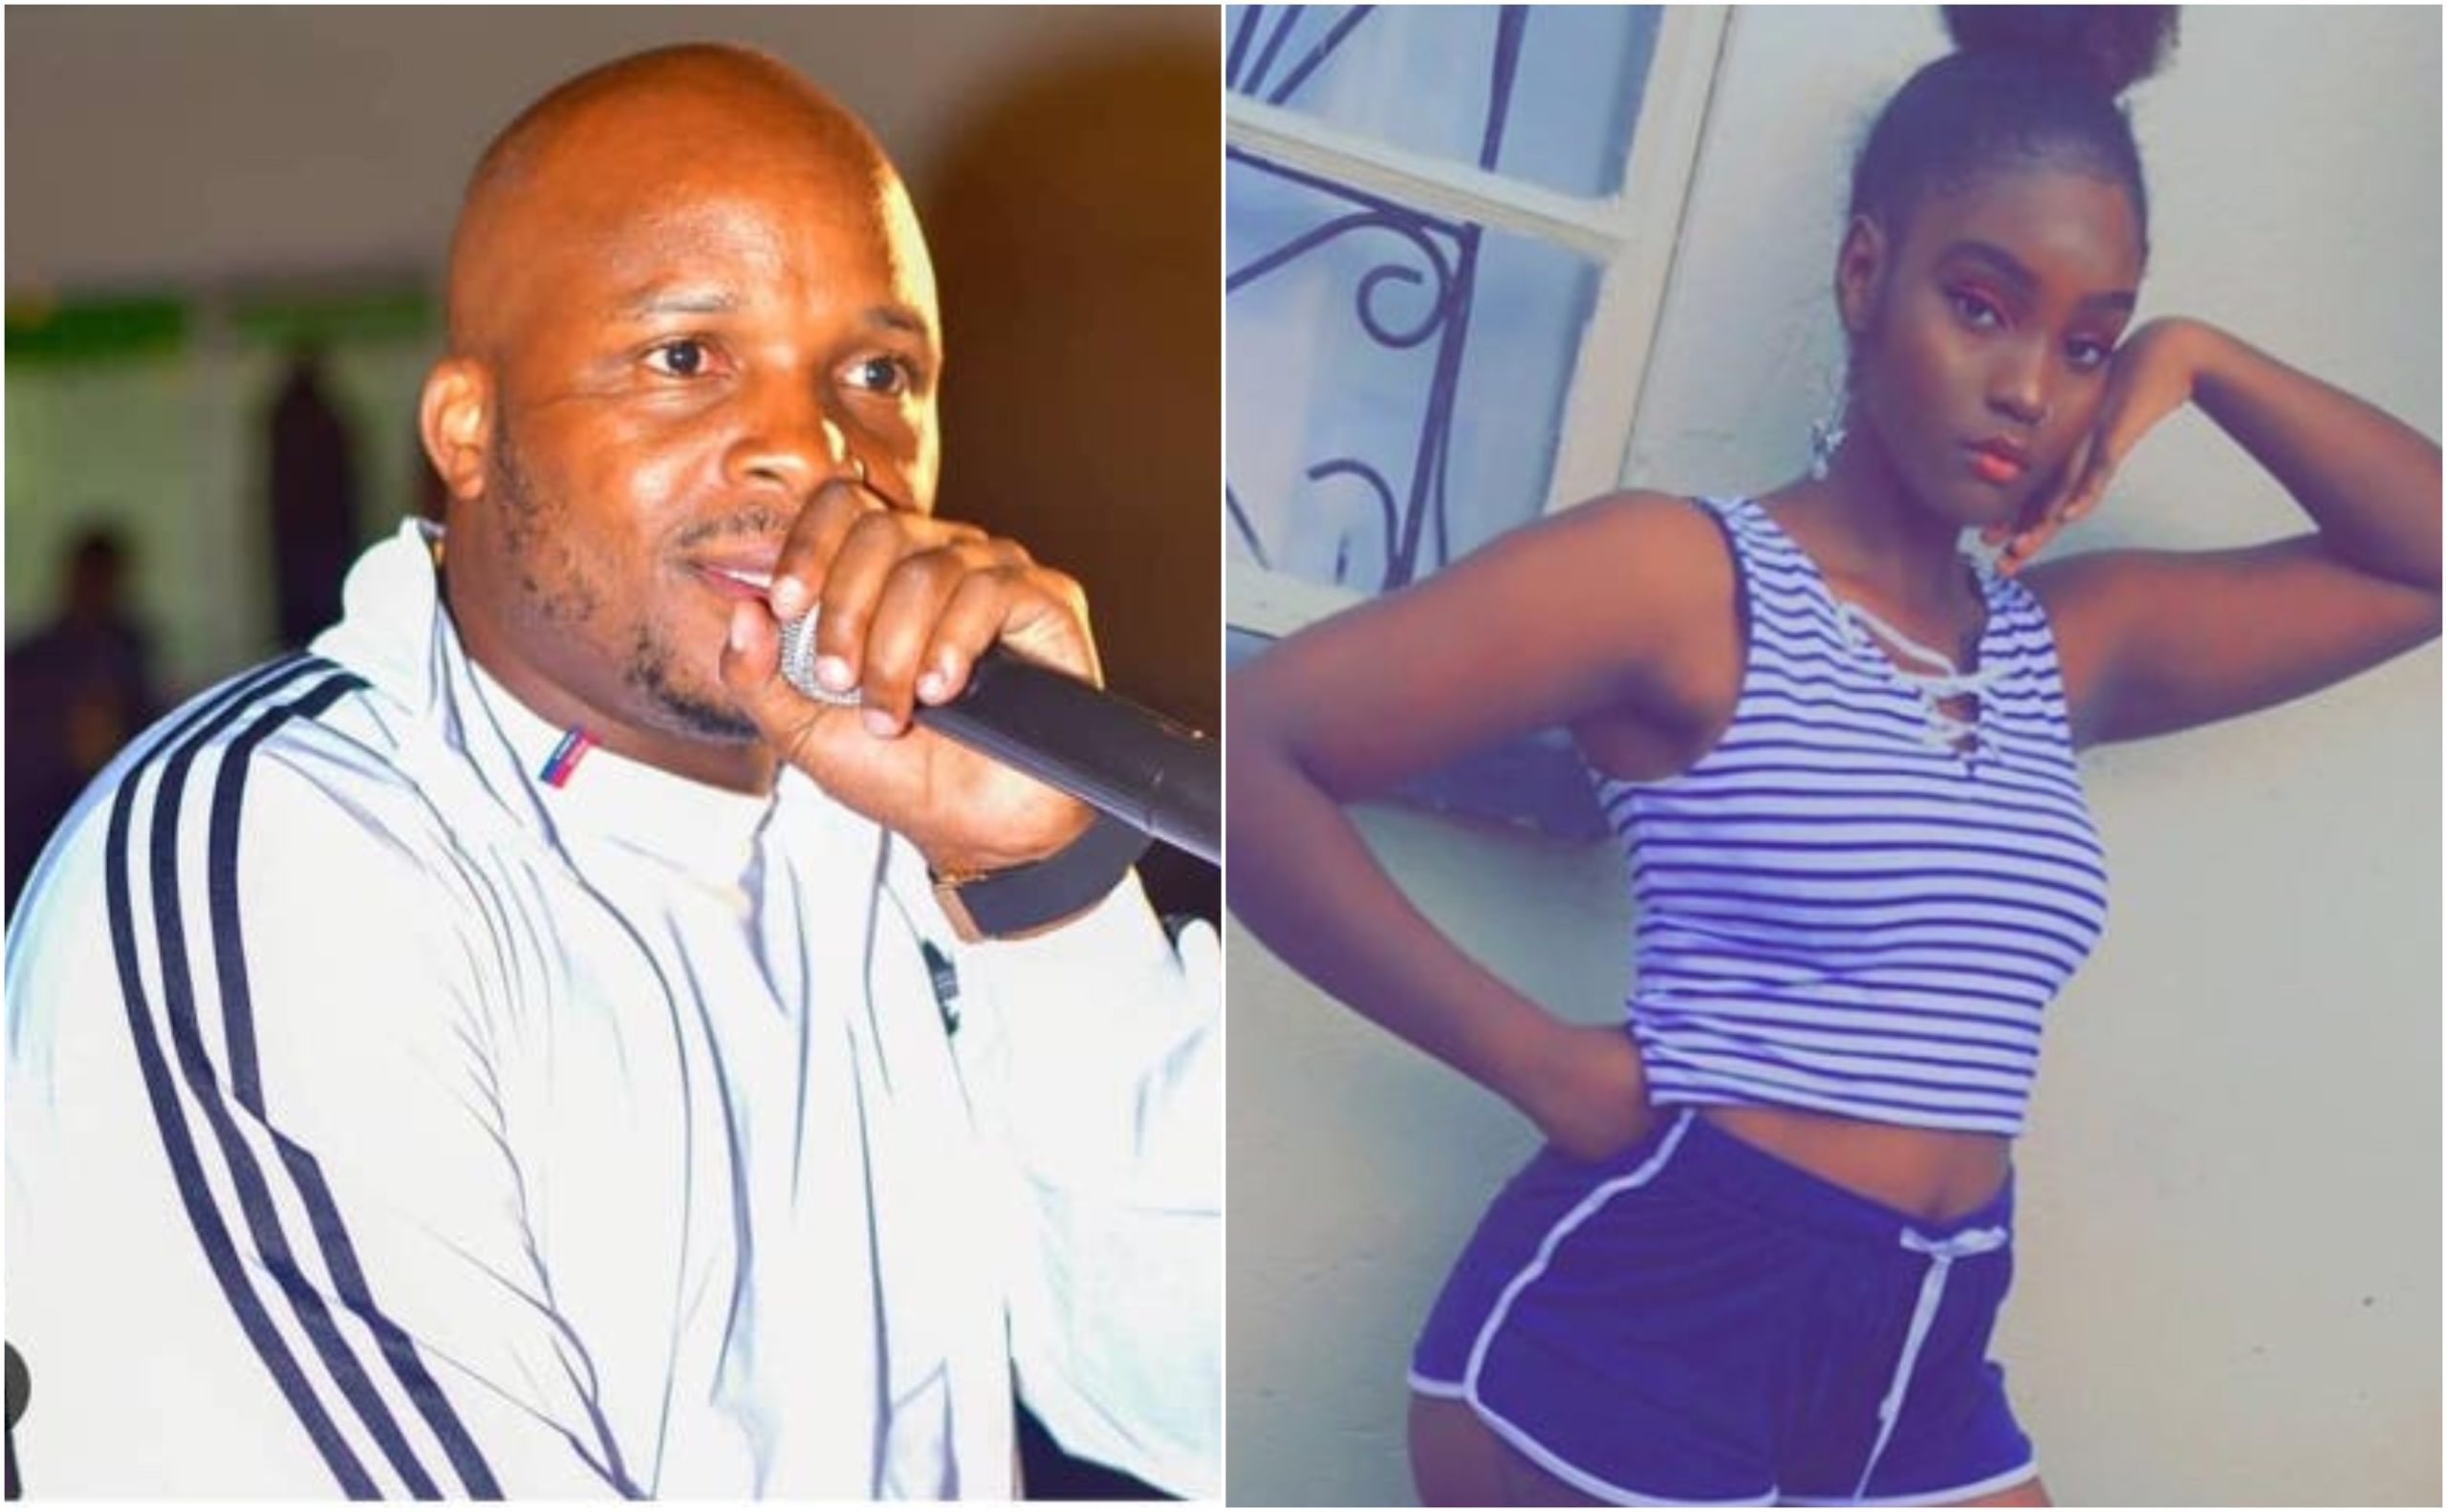 Jalang’o gets it rough after a suggestive photo of him with teen socialite Shakilla emerged